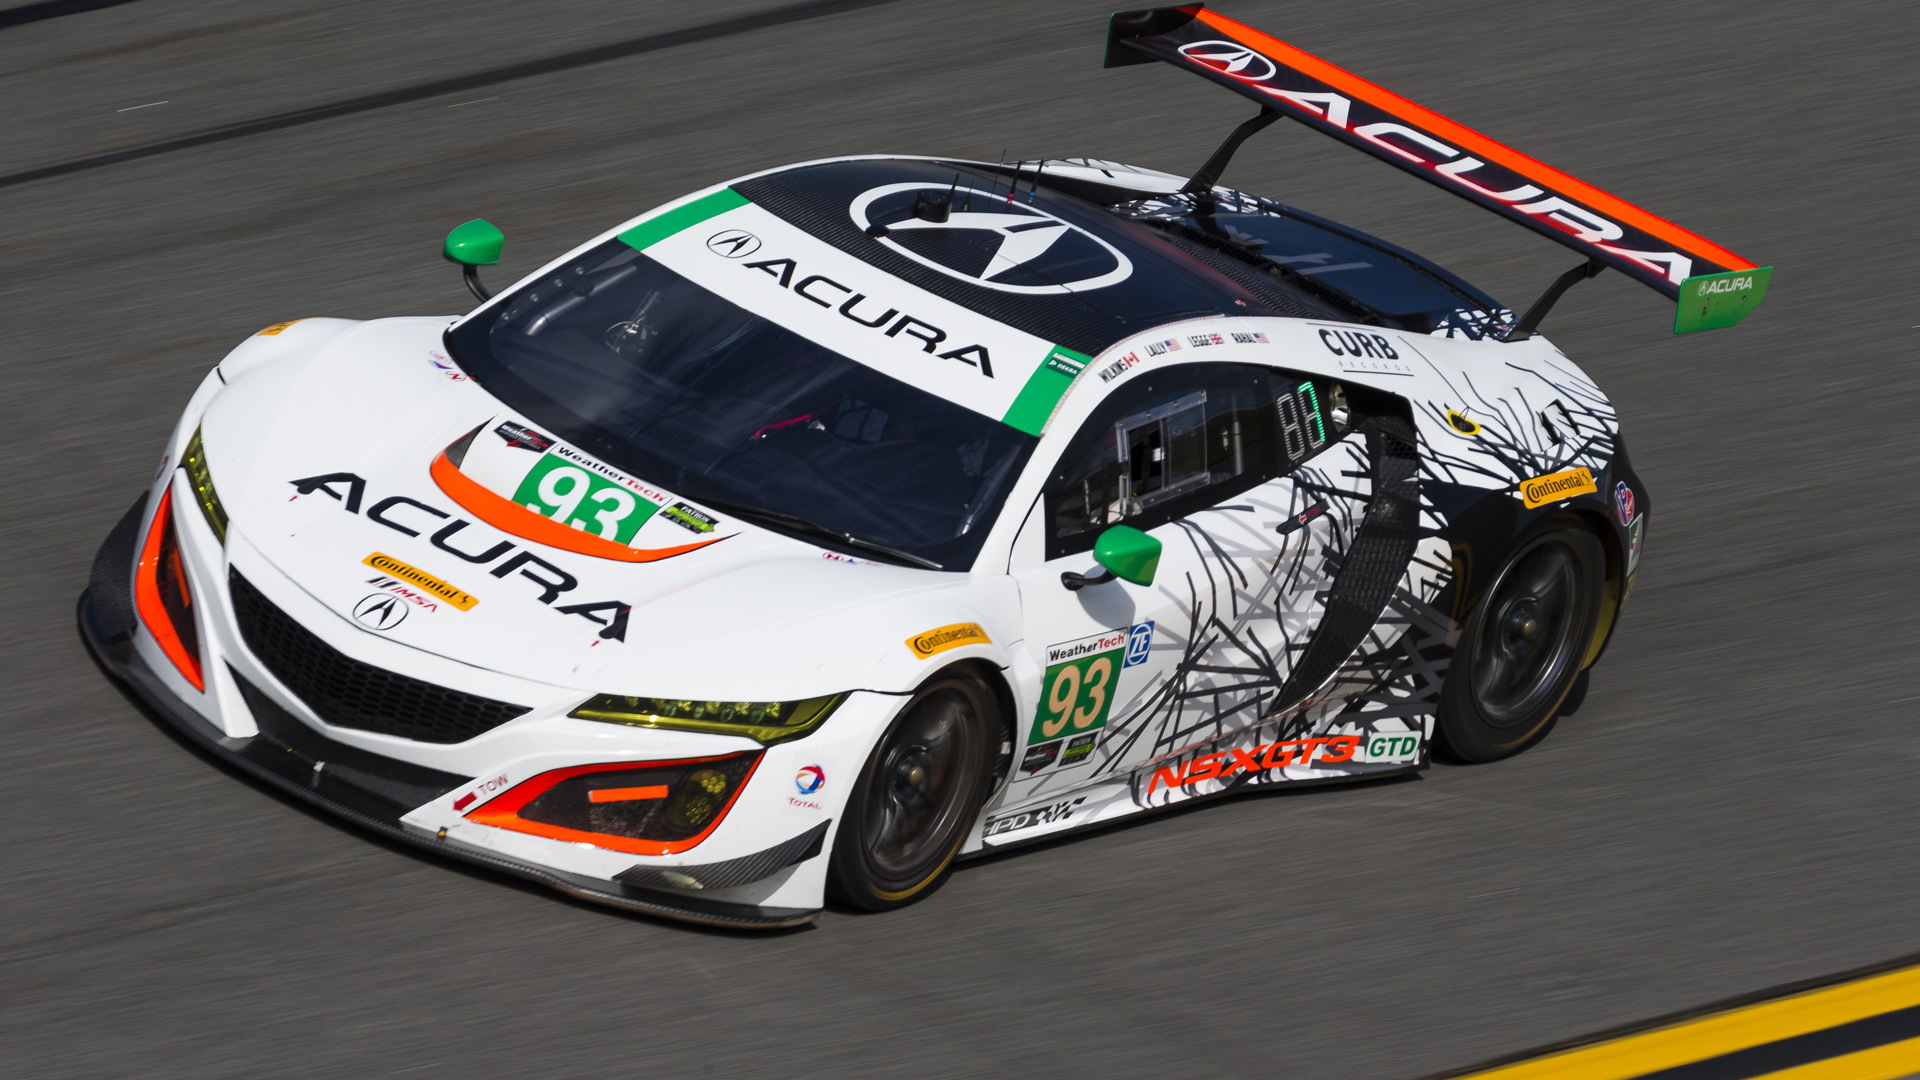 2017 Acura NSX GT3 race car competes in WeatherTech SportsCar Championship